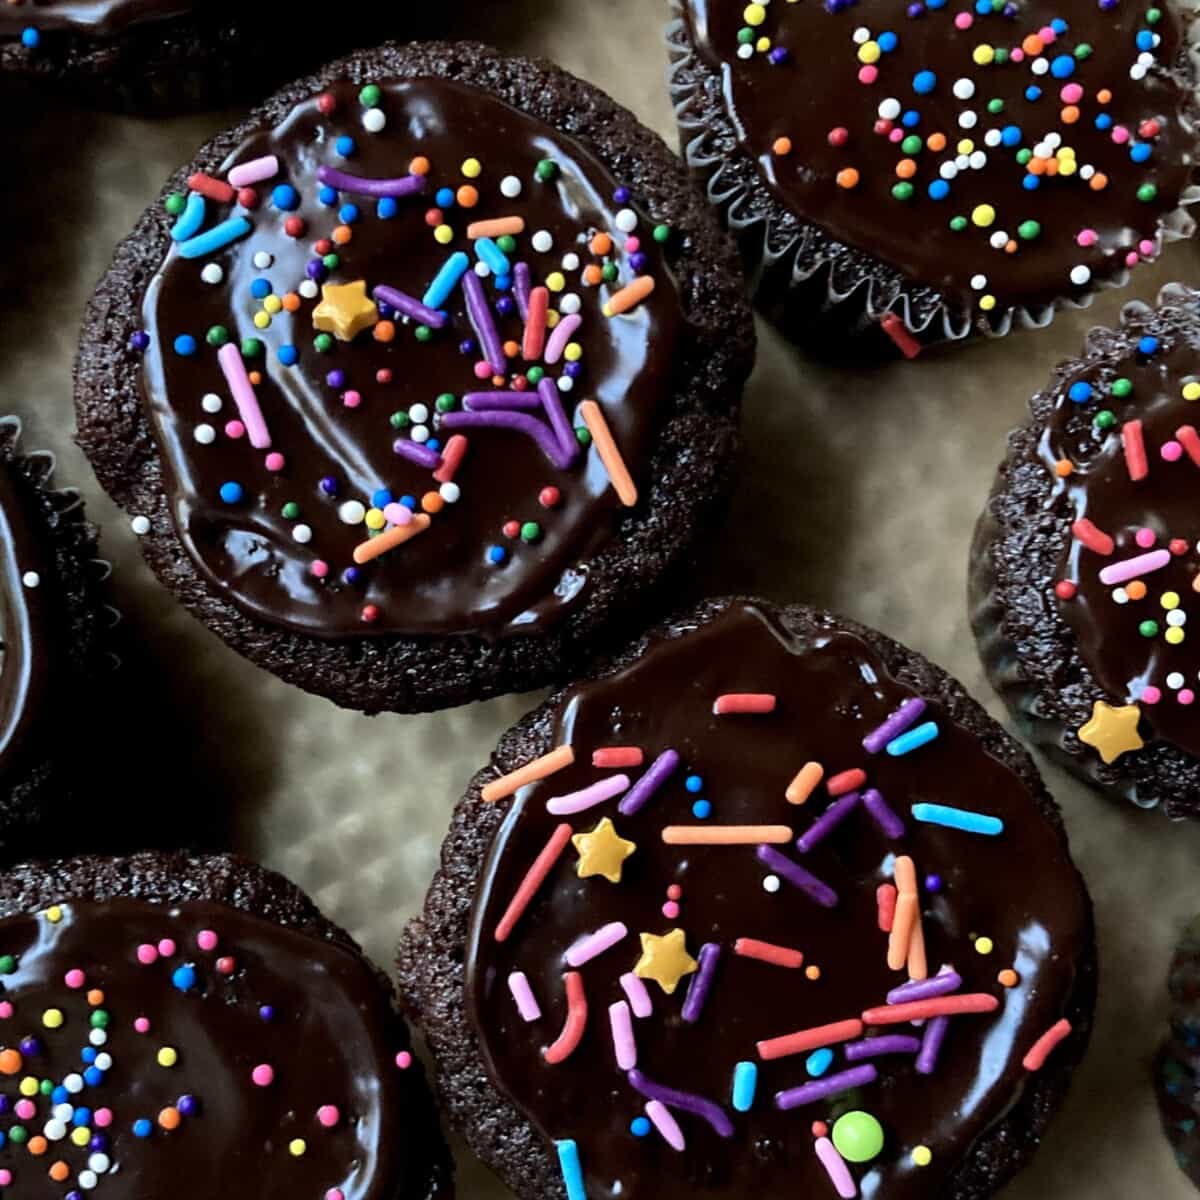 devils food cake chocolate cupcakes with chocolate ganache frosting and candy sprinkles